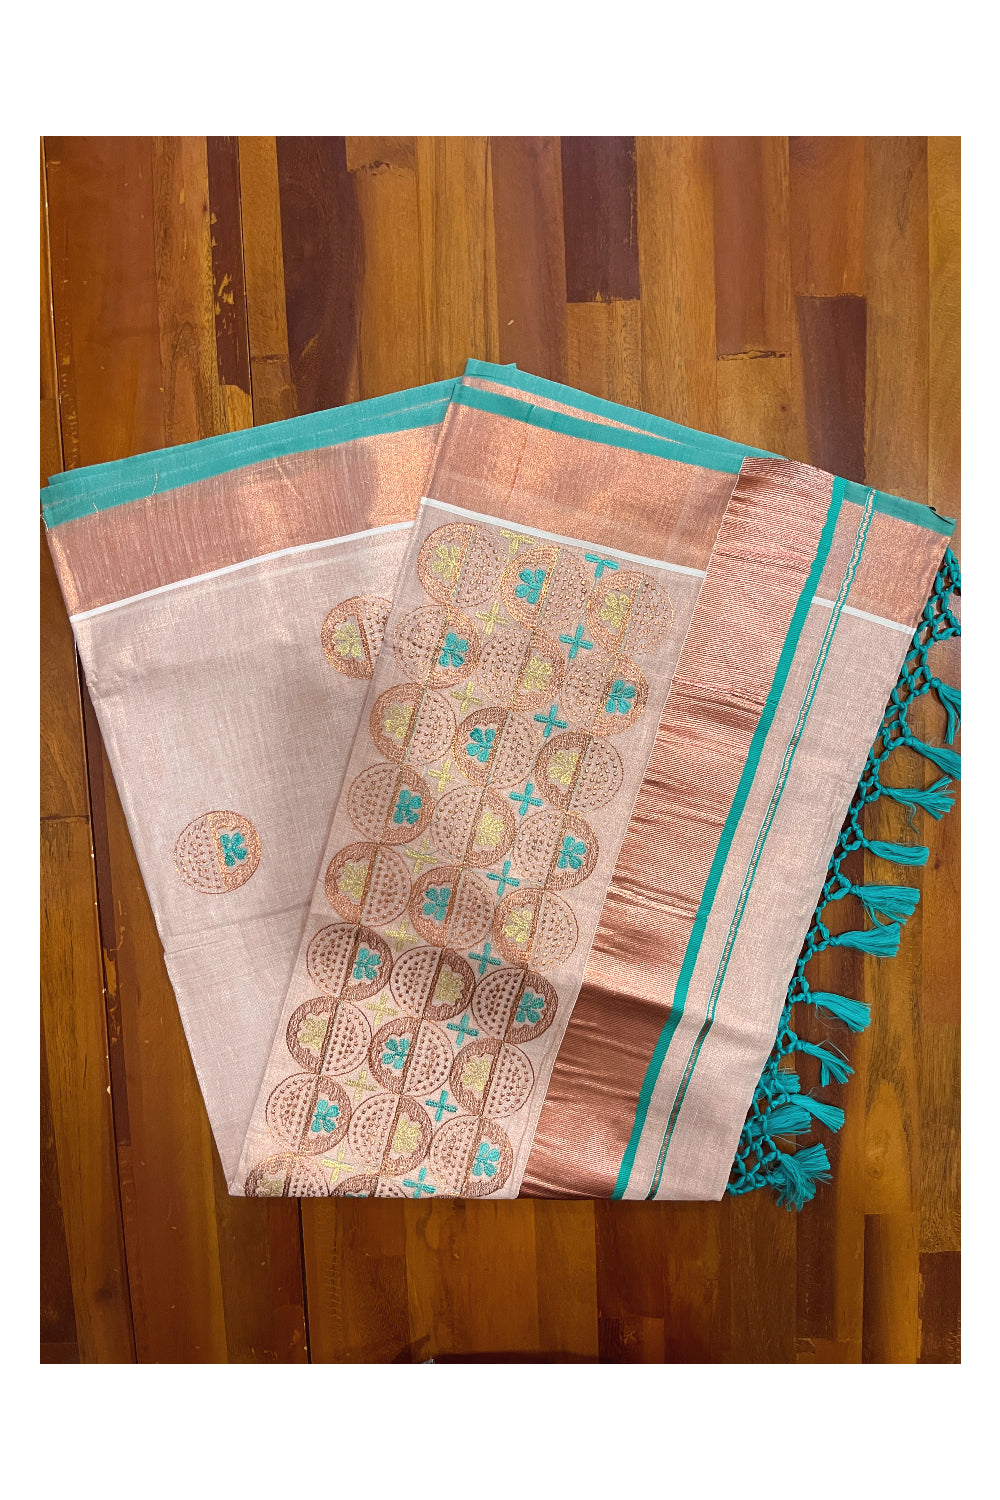 Southloom Copper Tissue Kasavu Saree with Embroidery Design and Turquoise Tassels Works on Pallu